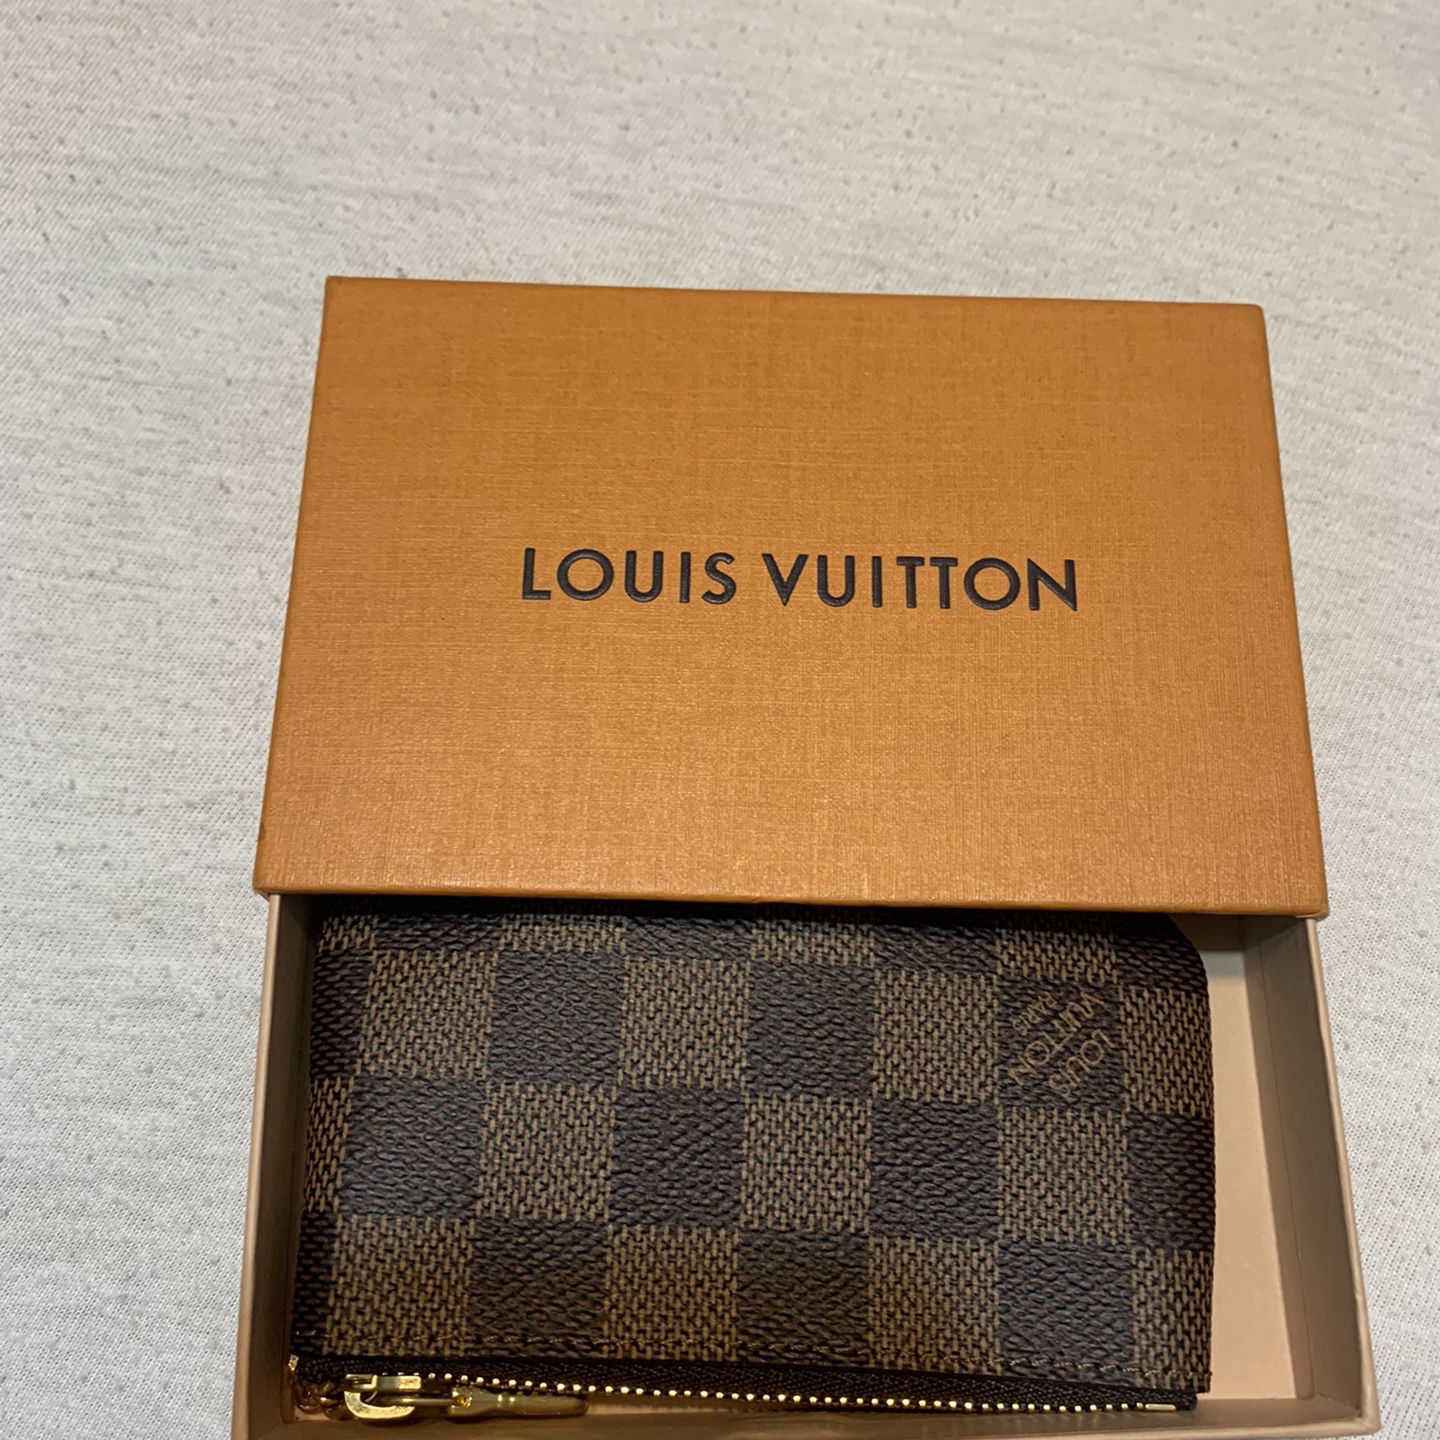 AUTHENTIC Louis Vuitton Riverside Bag for Sale in Laud Lakes, FL - OfferUp